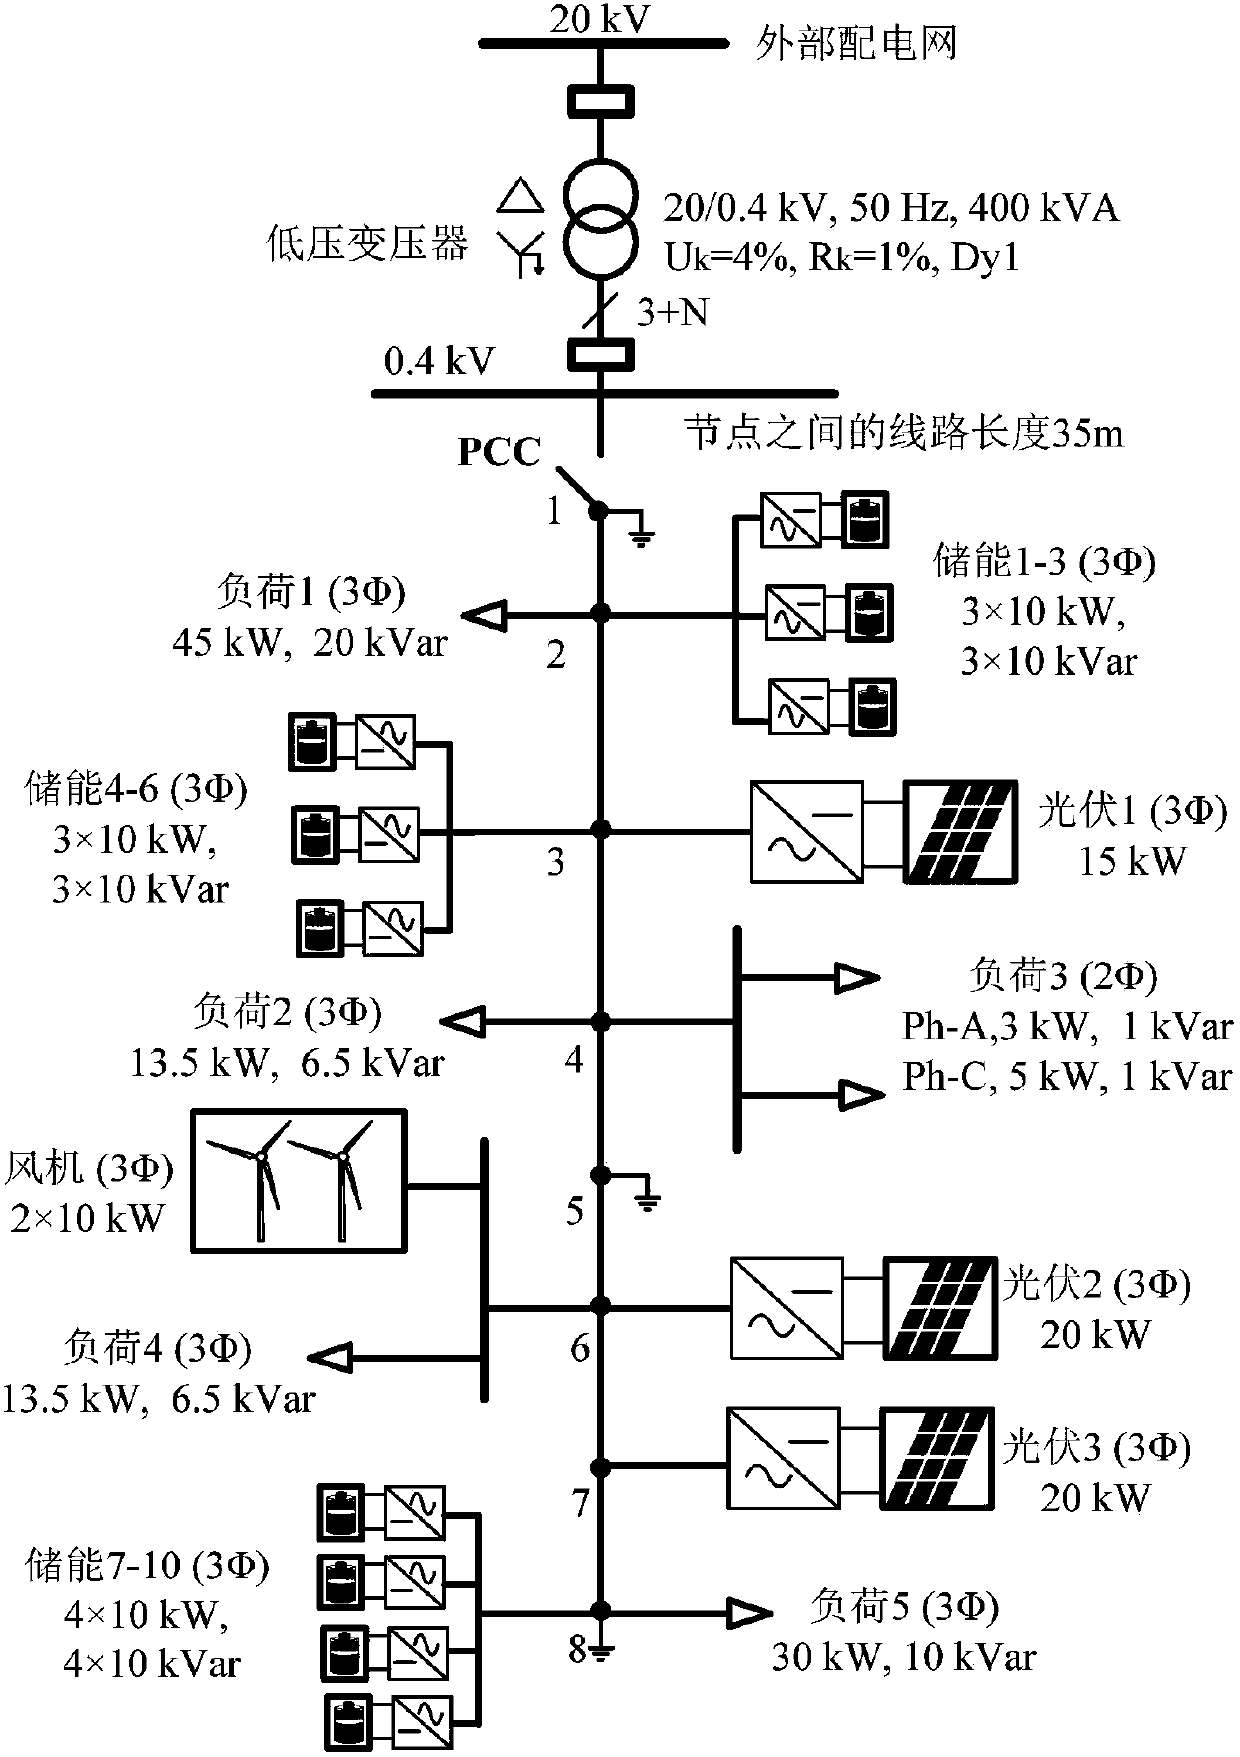 Distributed collaborative control method for multiple energy storage units in grid-connected microgrid